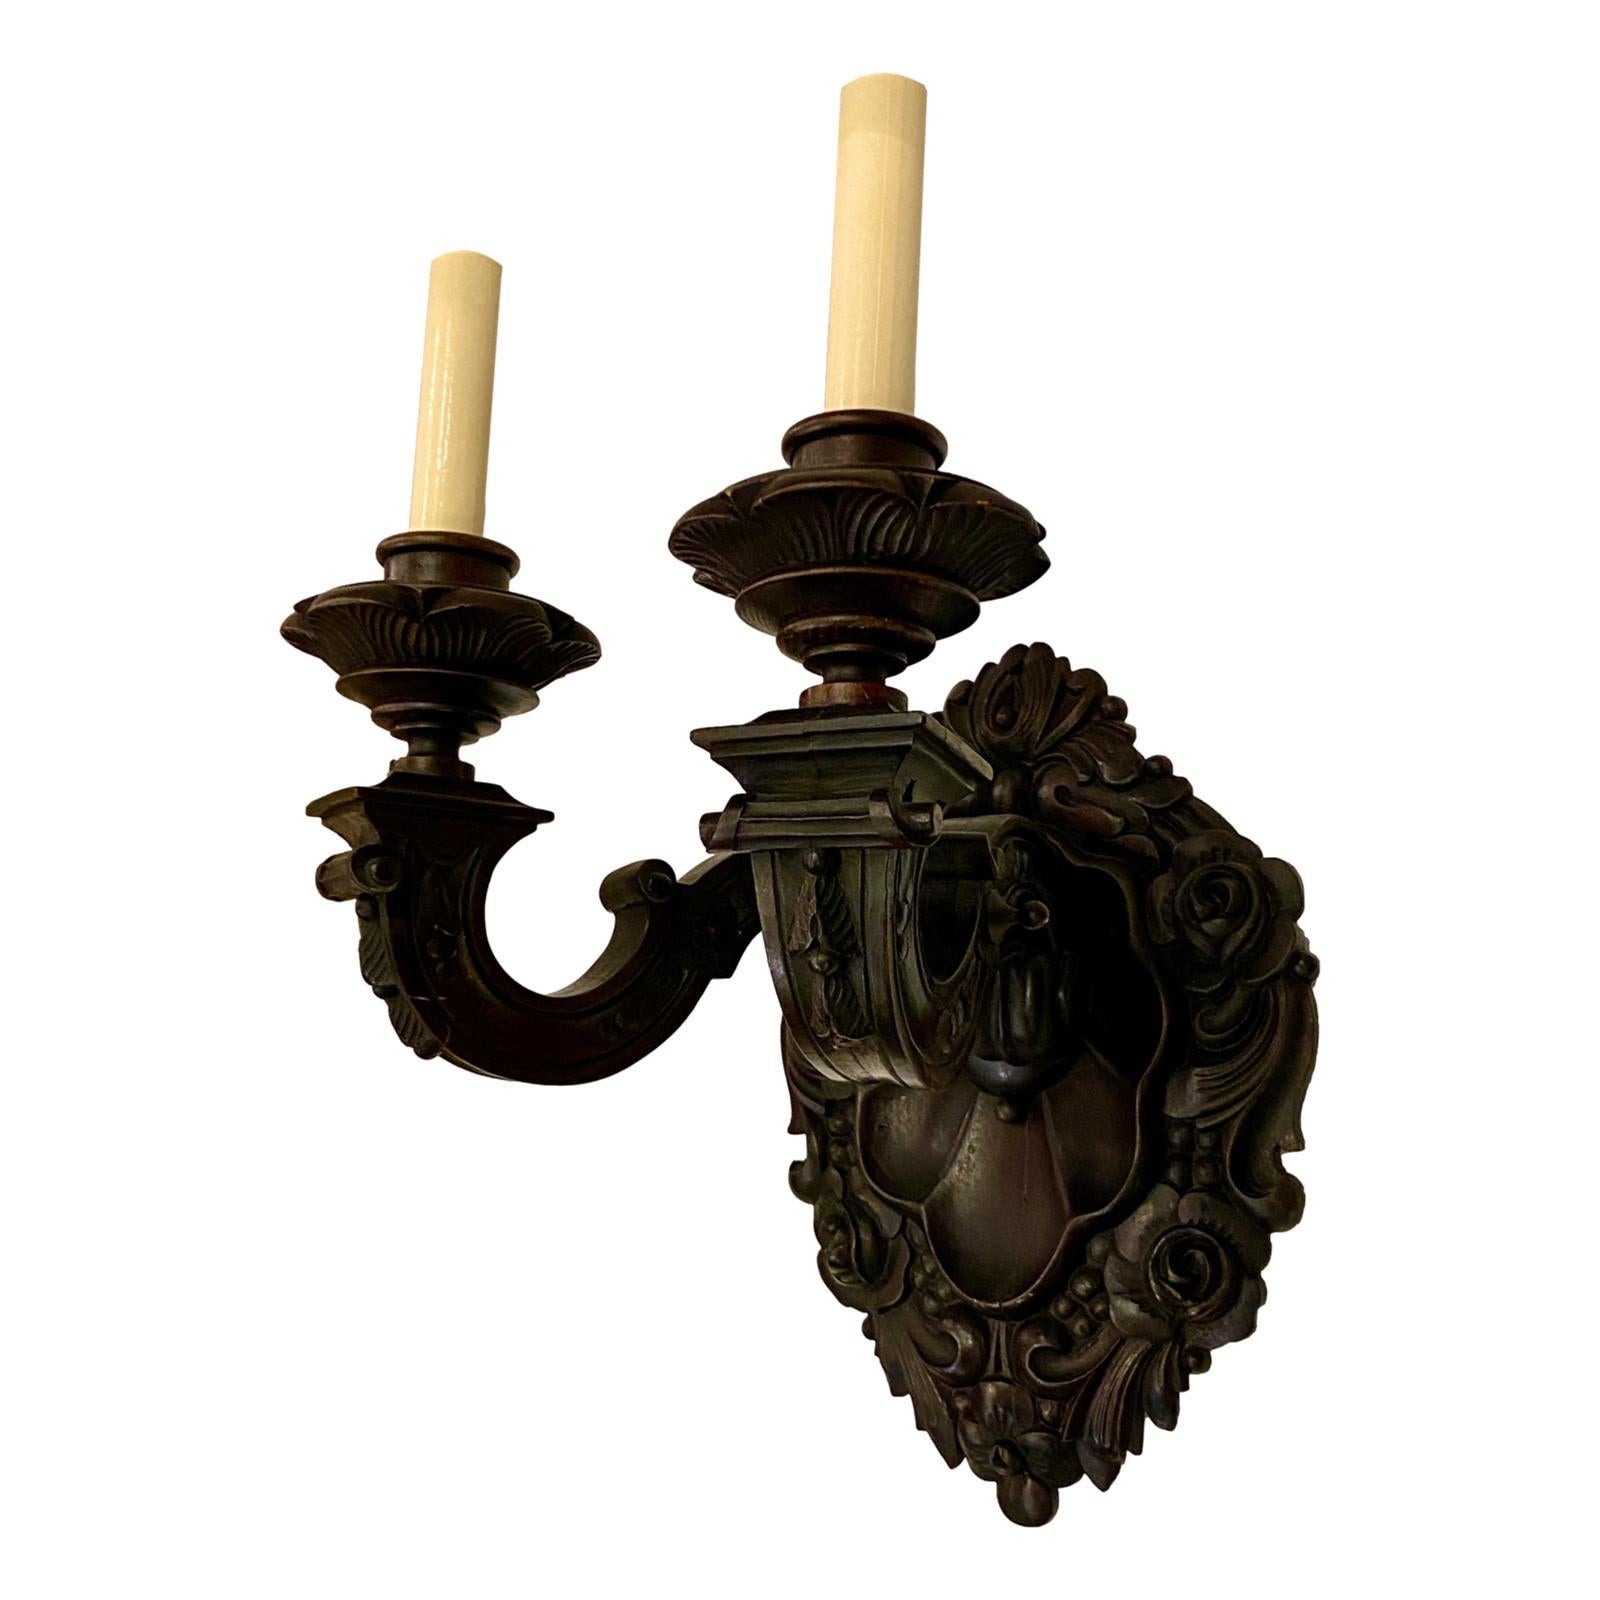 Pair of French circa 1920s double-light carved wood sconces with foliage and floral motif on body.

Measurements:
Height 11.5